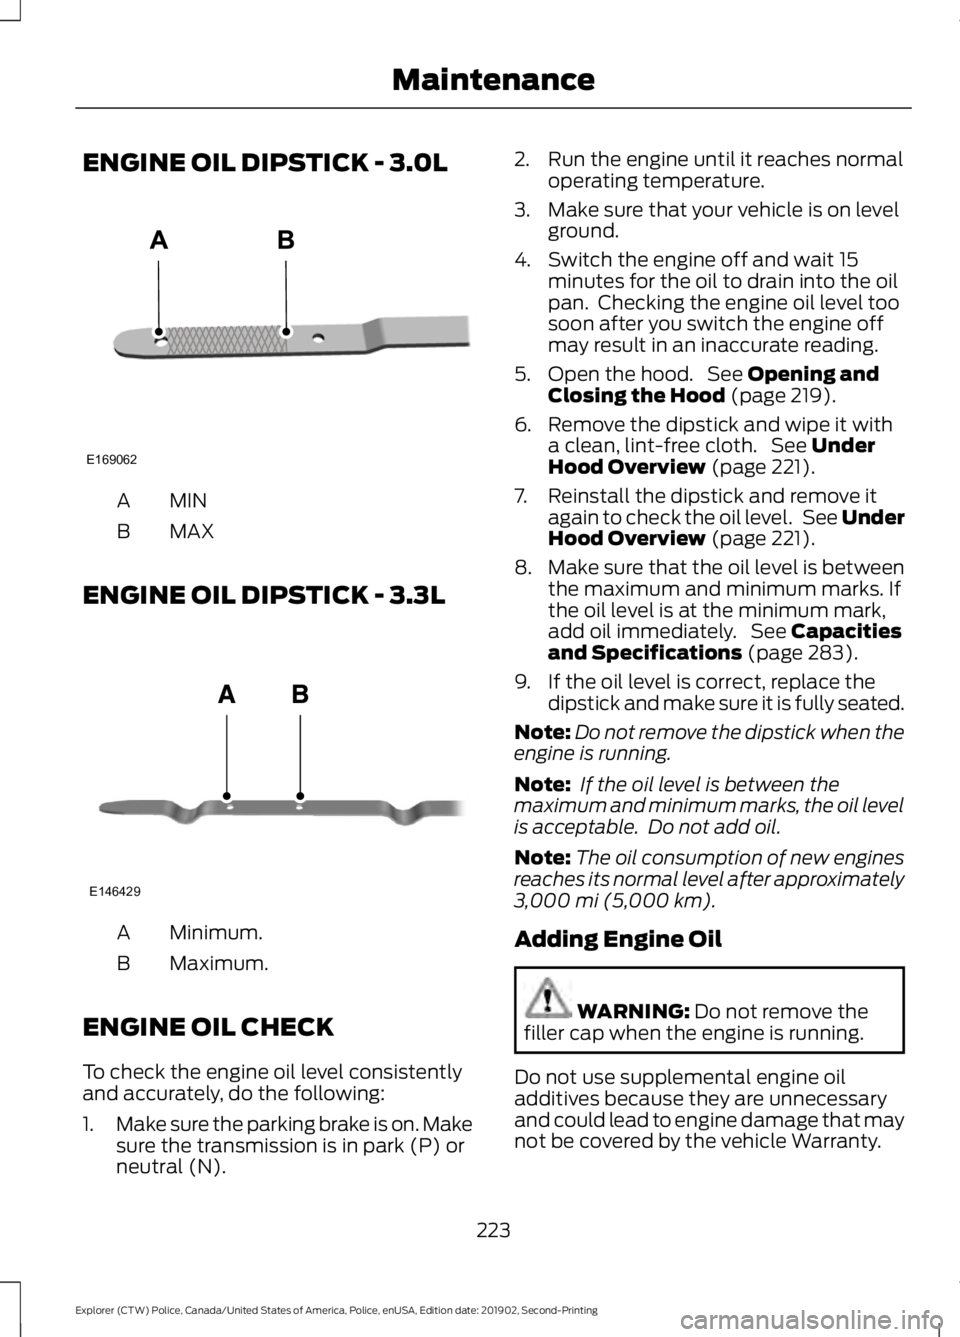 FORD POLICE INTERCEPTOR 2020  Owners Manual ENGINE OIL DIPSTICK - 3.0L
MINA
MAX
B
ENGINE OIL DIPSTICK - 3.3L Minimum.
A
Maximum.
B
ENGINE OIL CHECK
To check the engine oil level consistently
and accurately, do the following:
1. Make sure the pa